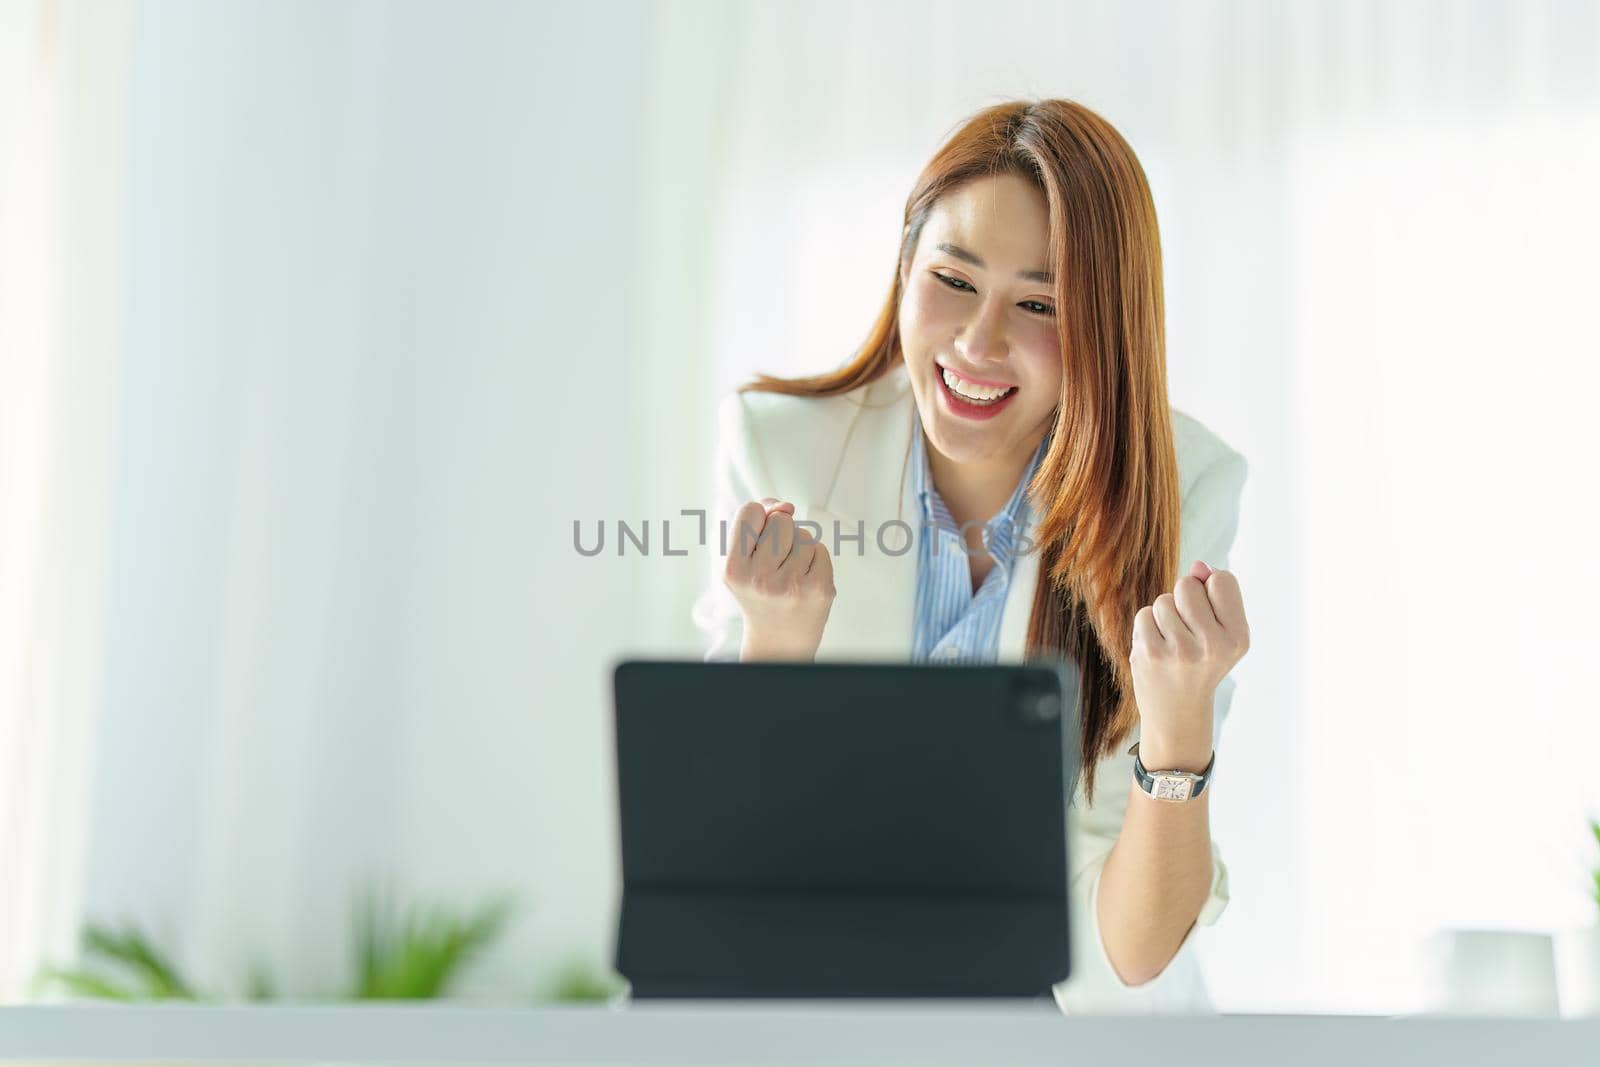 Portrait of a successful Asian businesswoman or business owner expressing excitement and joy using a tablet computer in the office.